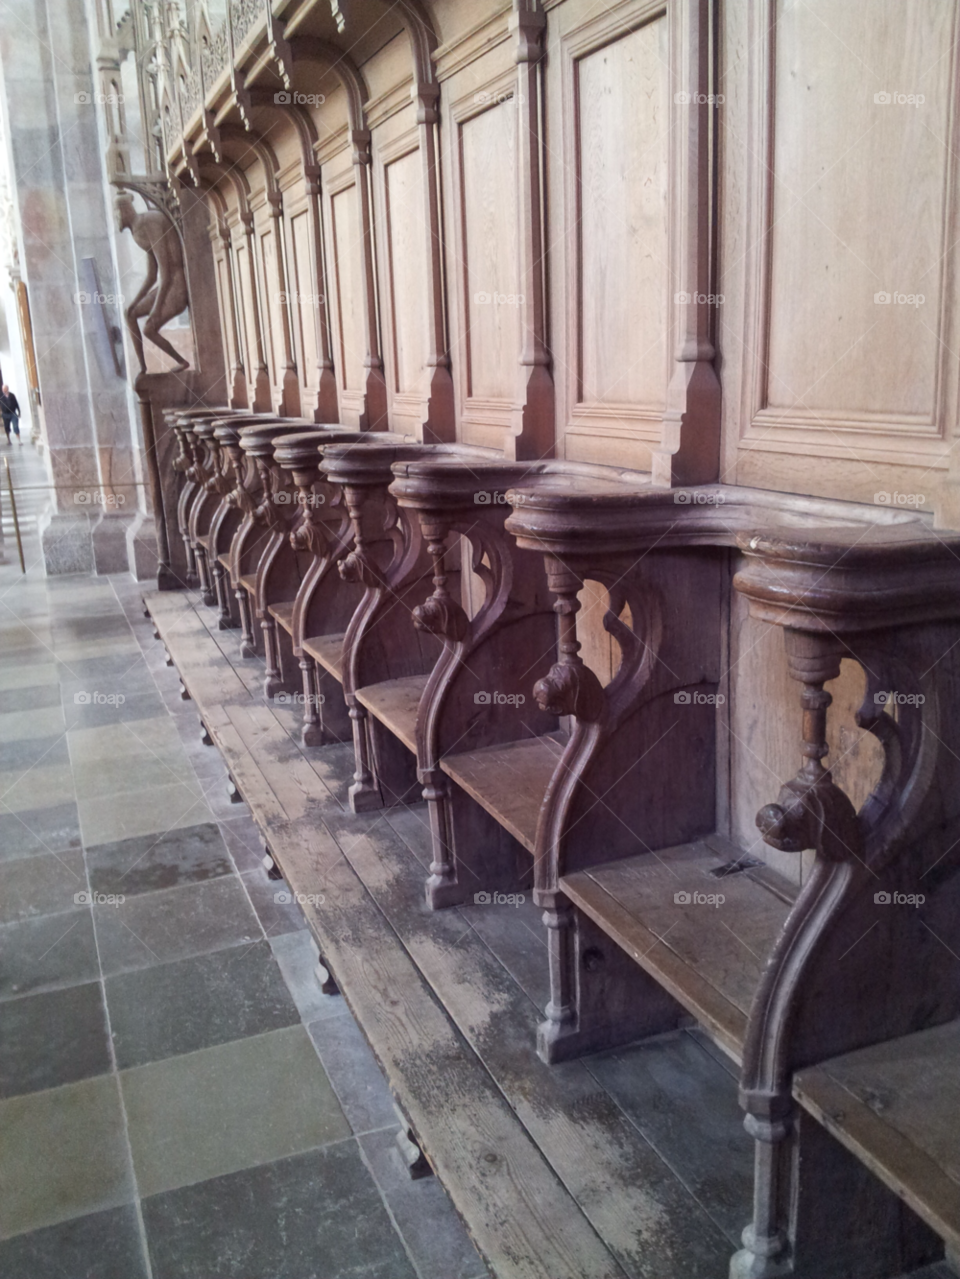 chairs in the church dogs graven wood ribe danemark simple by empire13